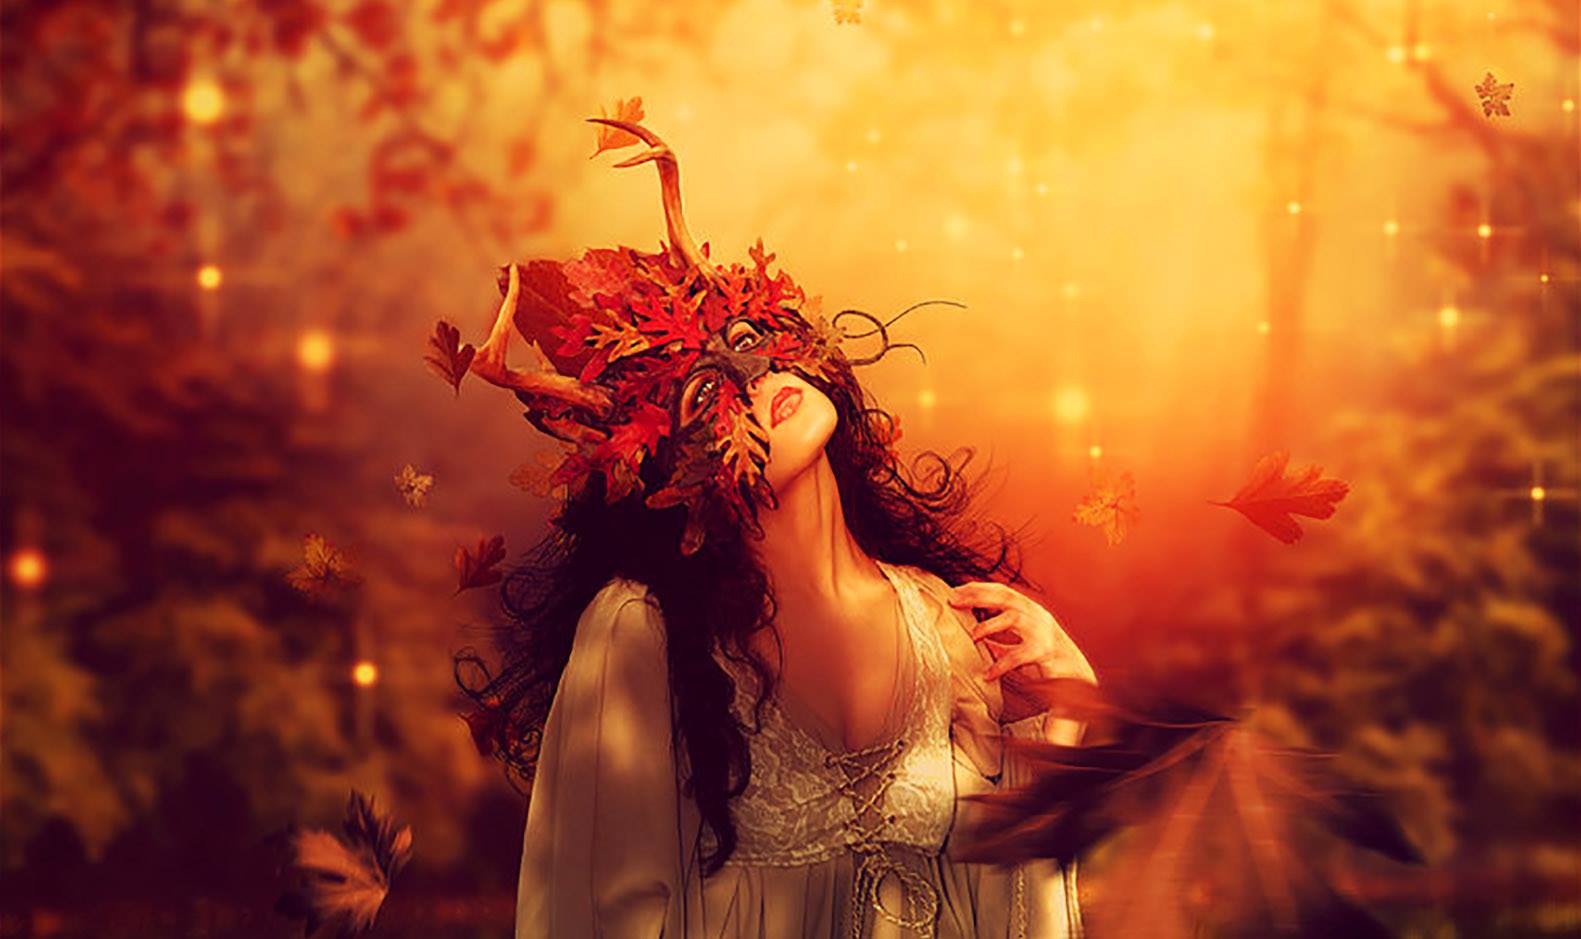 Spiritual Significance of Autumn Equinox, September 22: Bringing Something New Into Our Lives